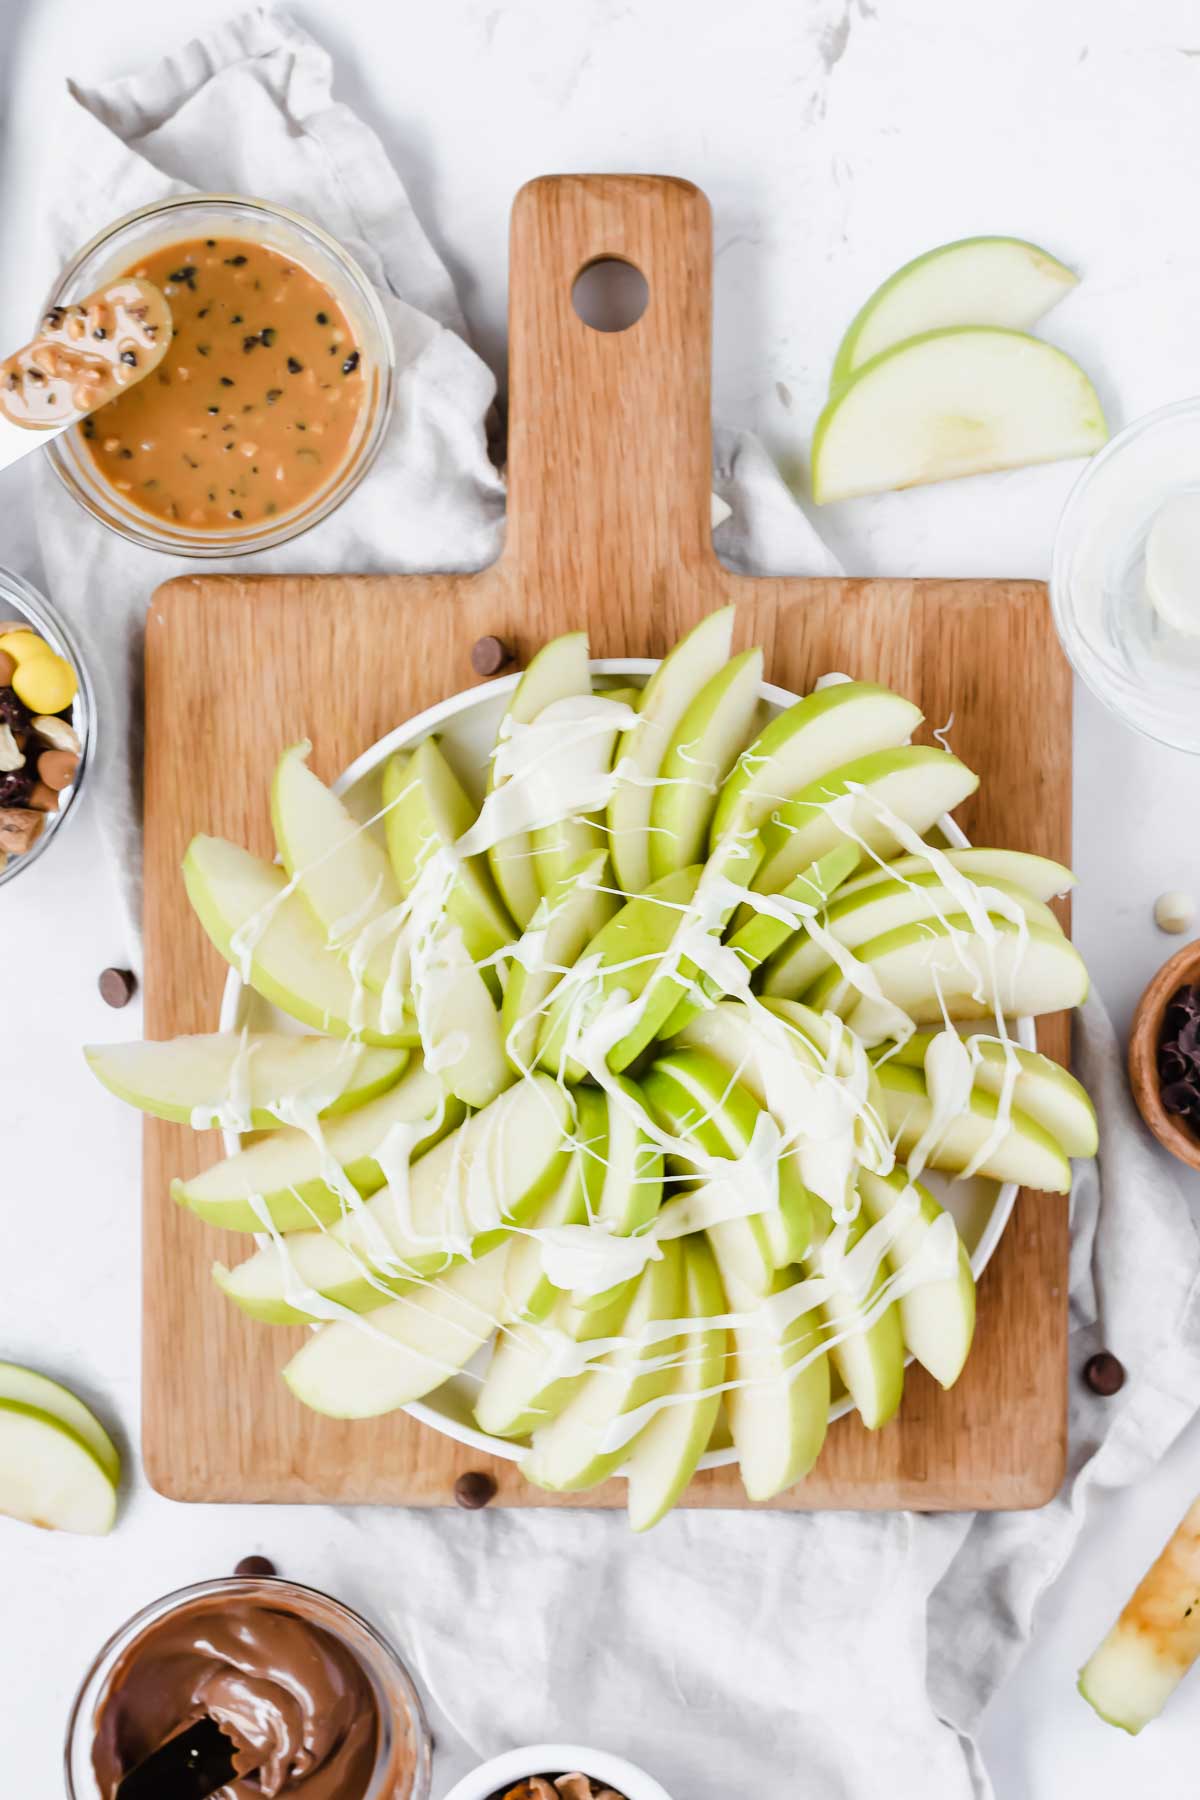 sliced apples arranged in circular fashion on wood cutting board surrounded by apple nacho ingredients.